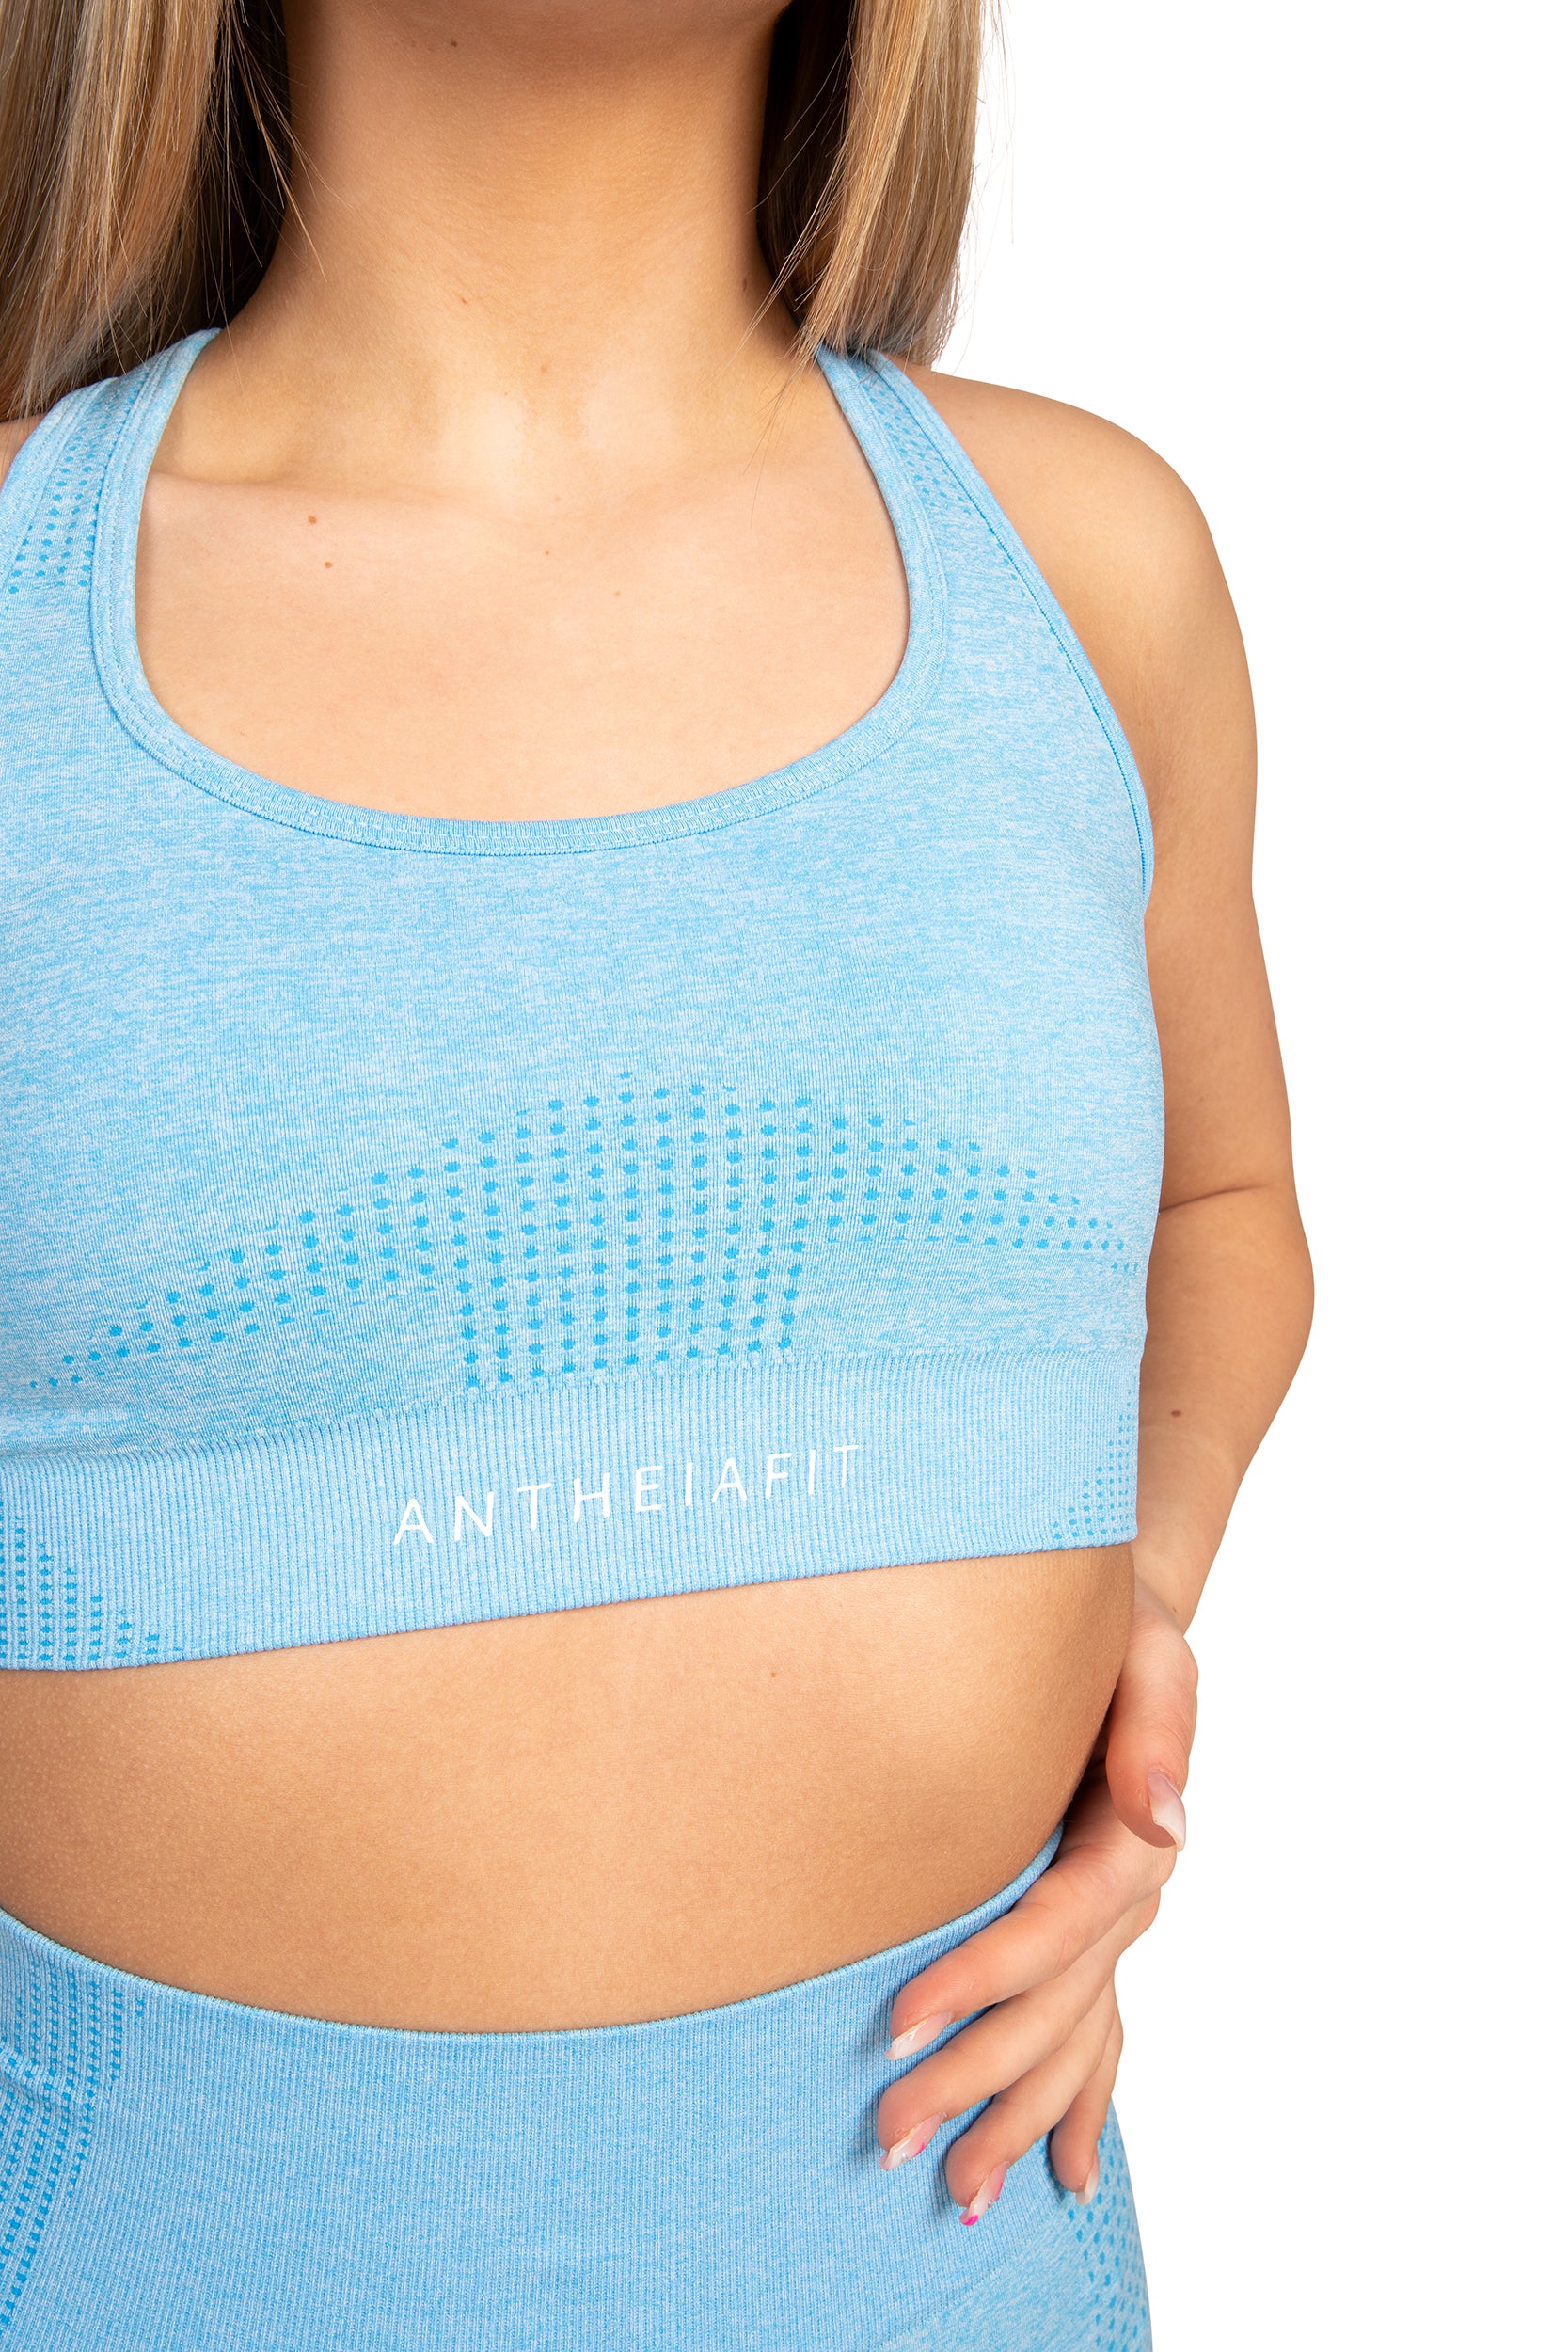 Eashery She Fit Sports Bras Women's Seamless Pullover Bra With Built-in Cups  Blue 38C 